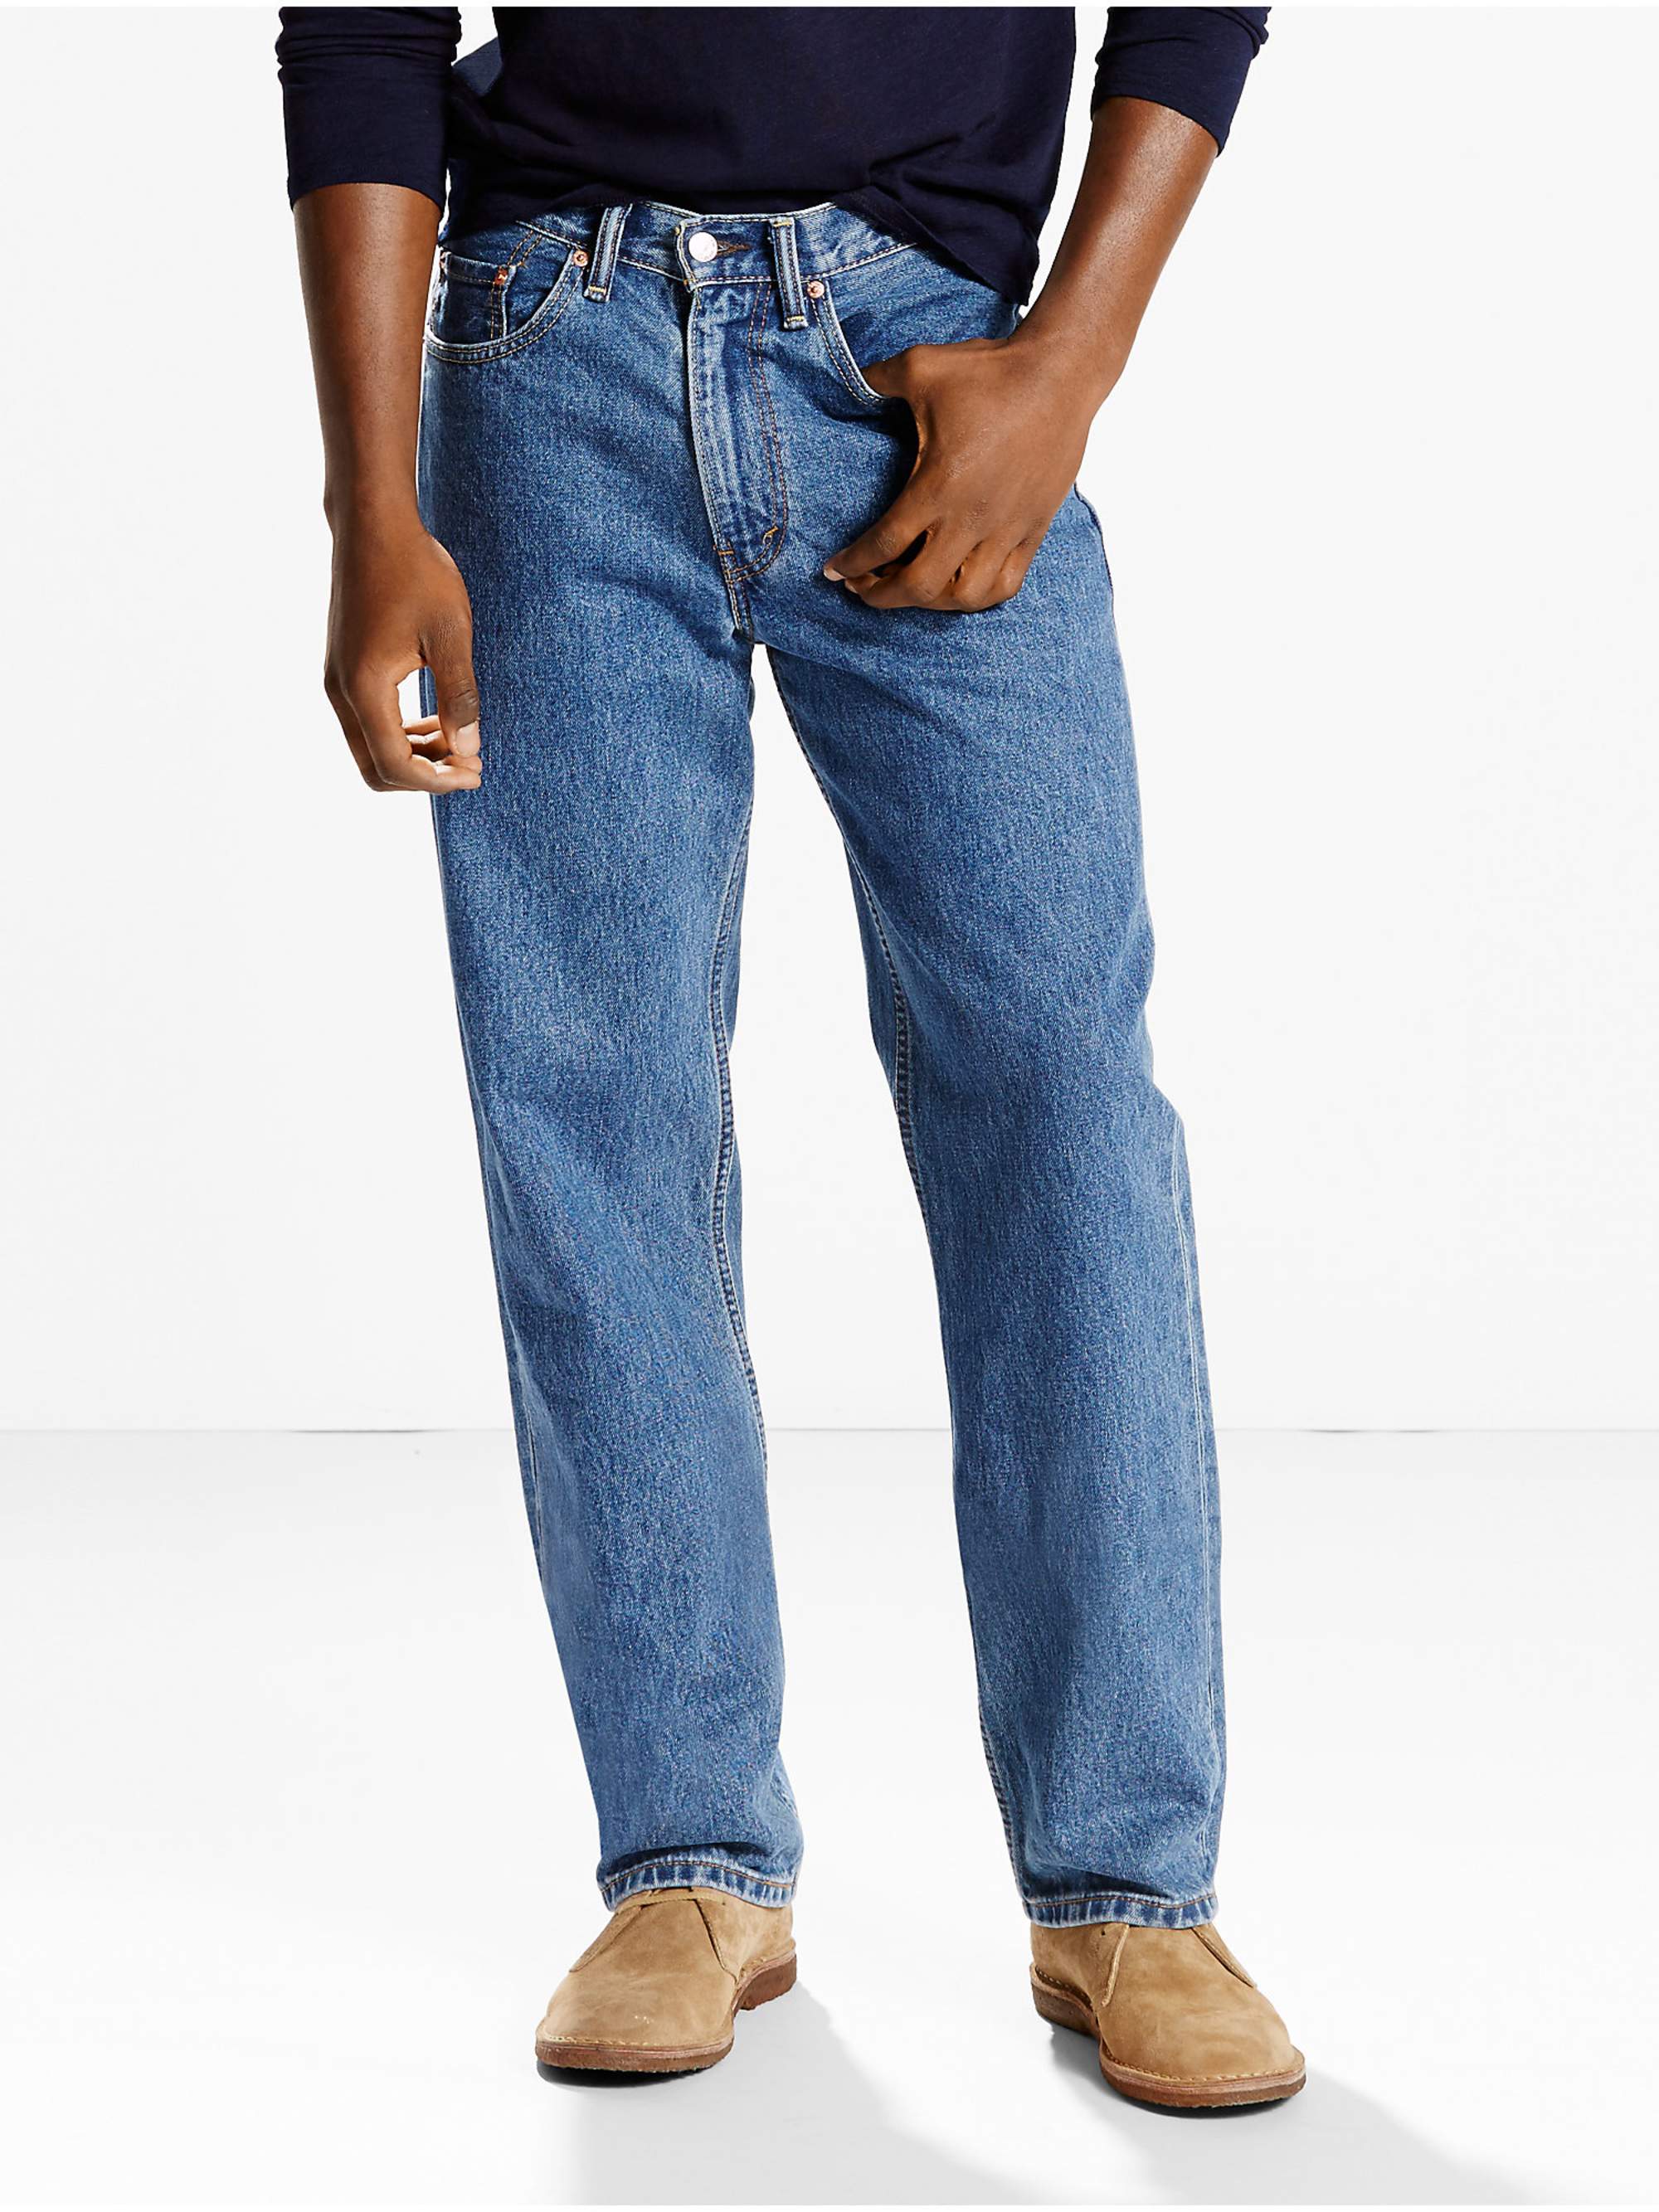 Levi's Men's Big & Tall 550 Relaxed Fit Jeans - image 1 of 7